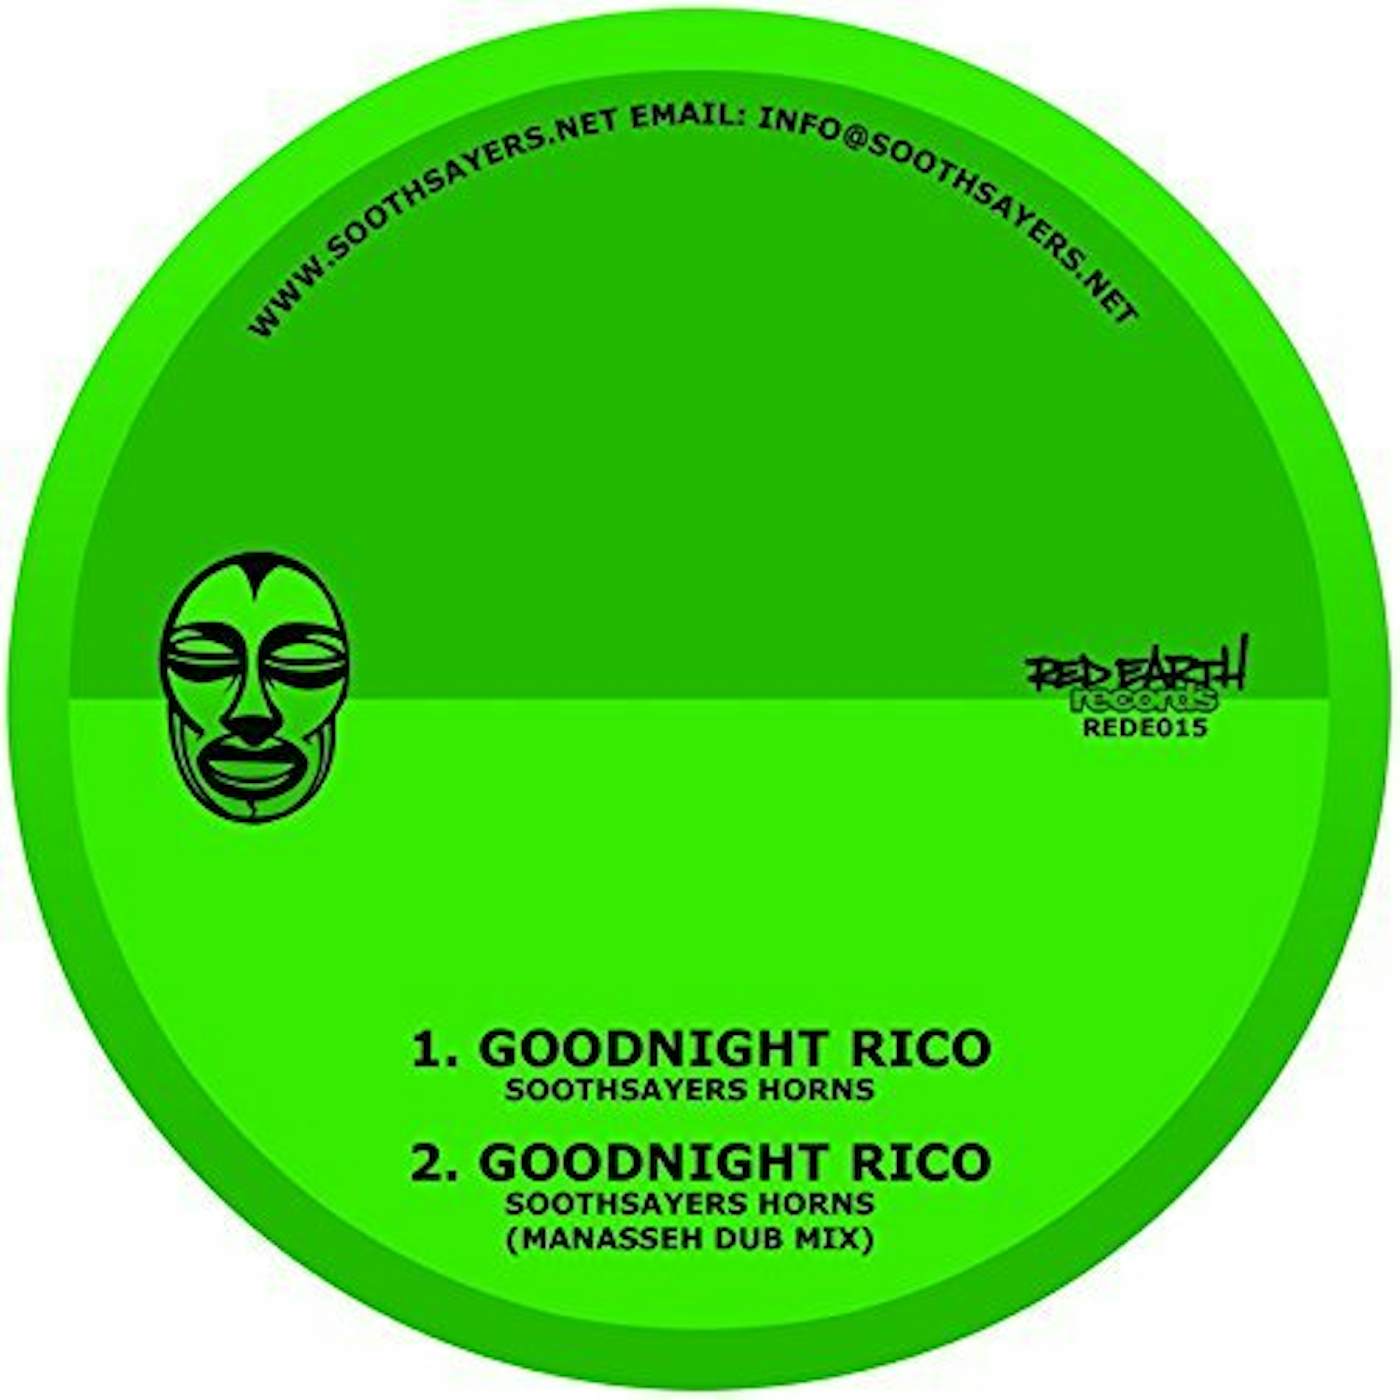 Soothsayers Horns Goodnight Rico Vinyl Record